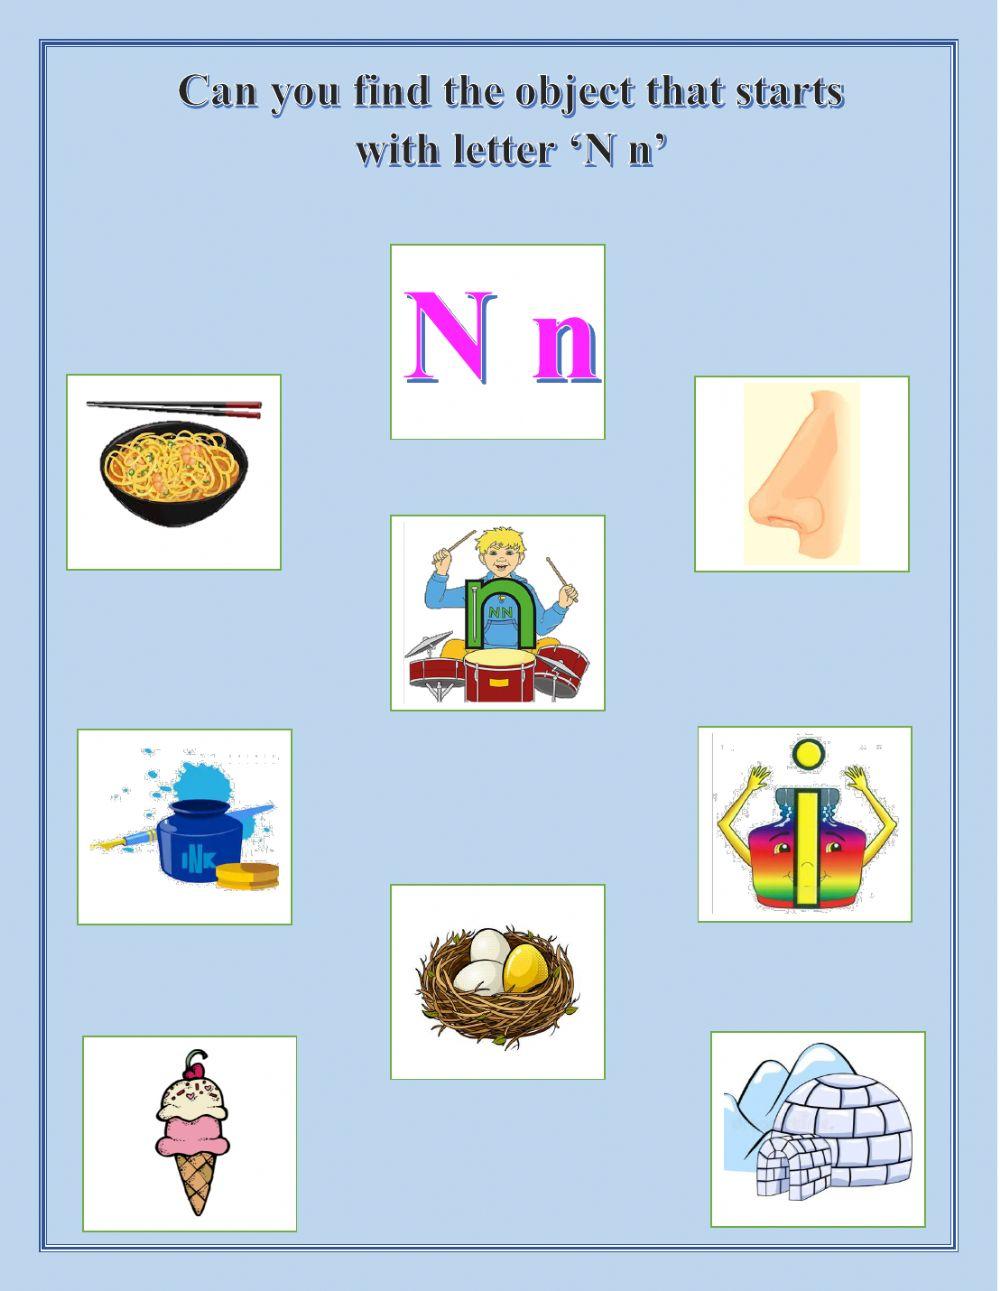 Find the object that starts with letter ‘N n’